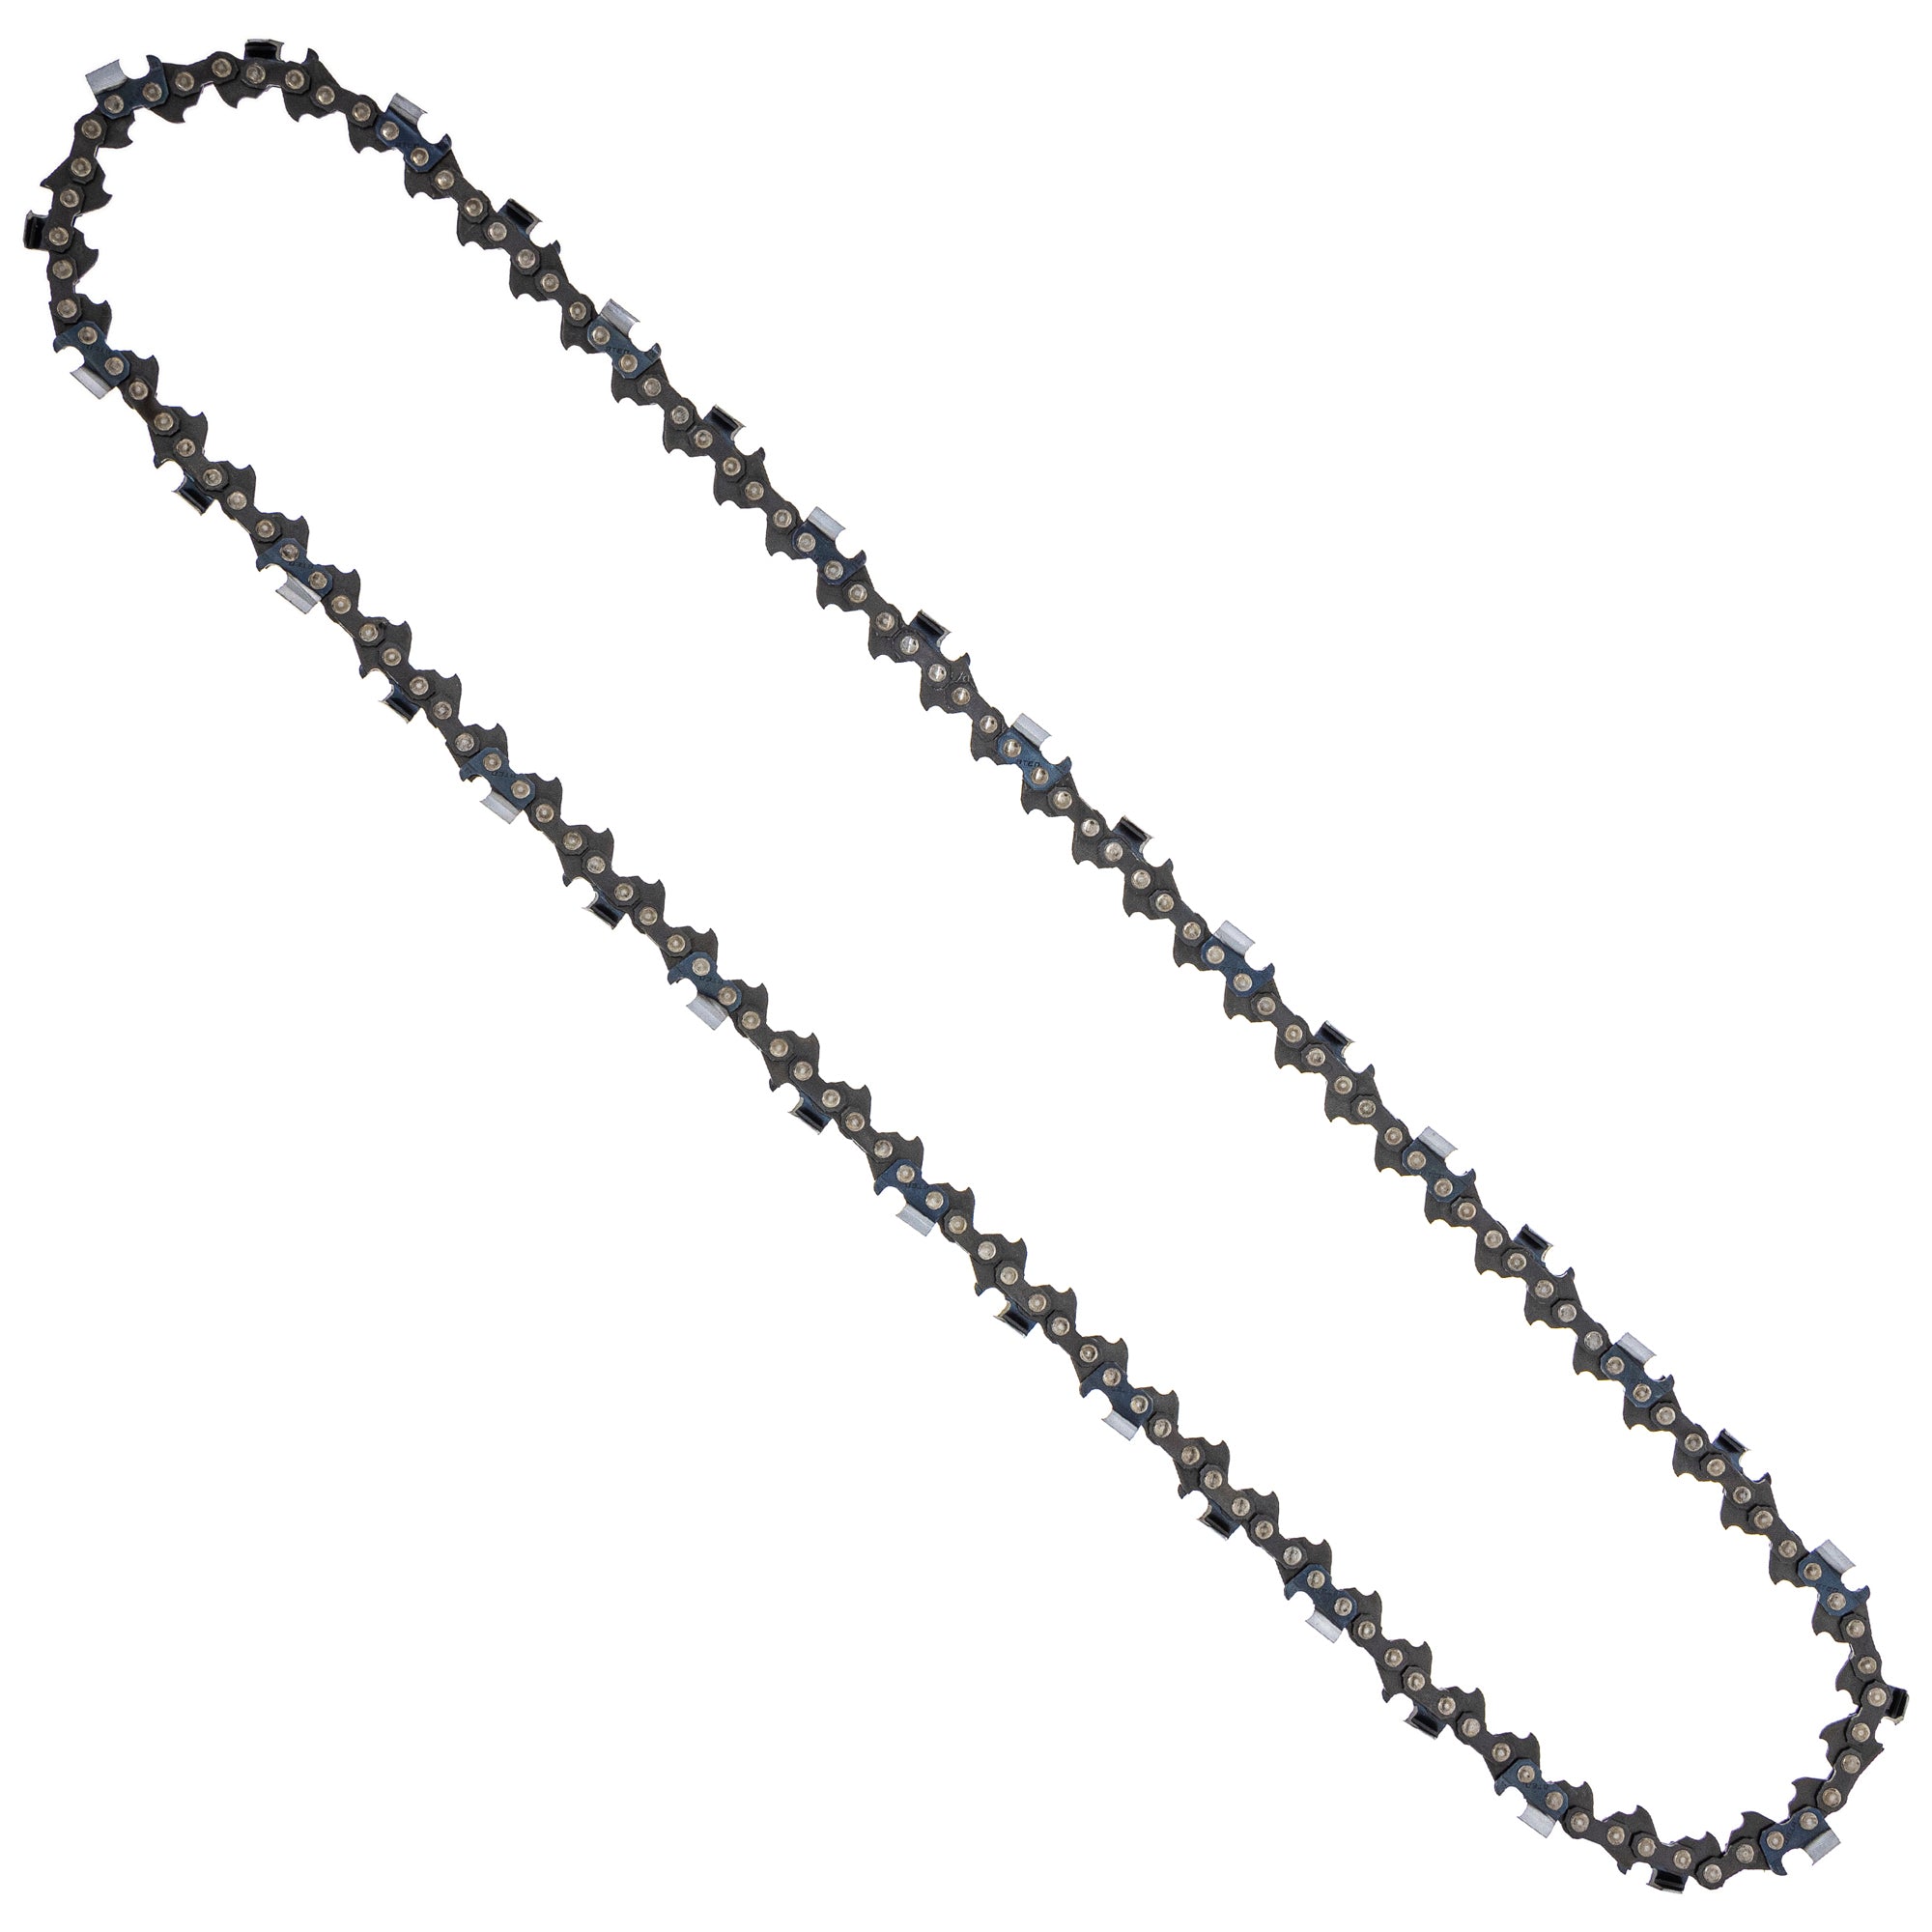 8TEN 810-CCC2263H Chain 6-Pack for zOTHER Oregon Husqvarna Poulan